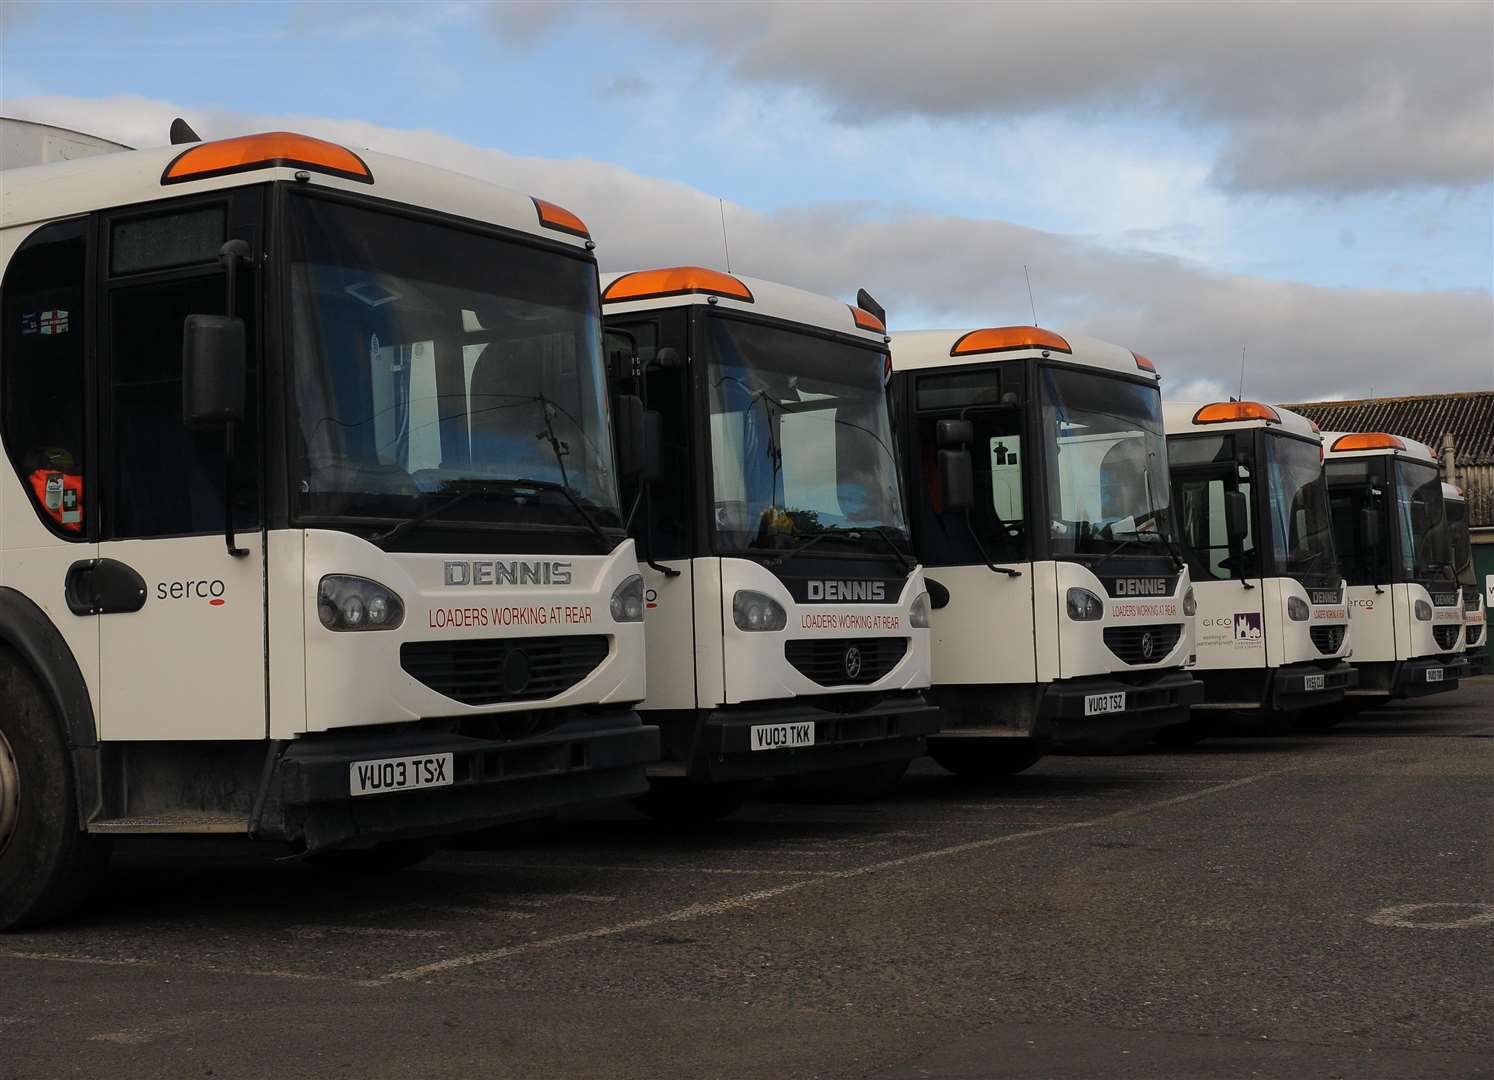 The city council may take on the Serco fleet